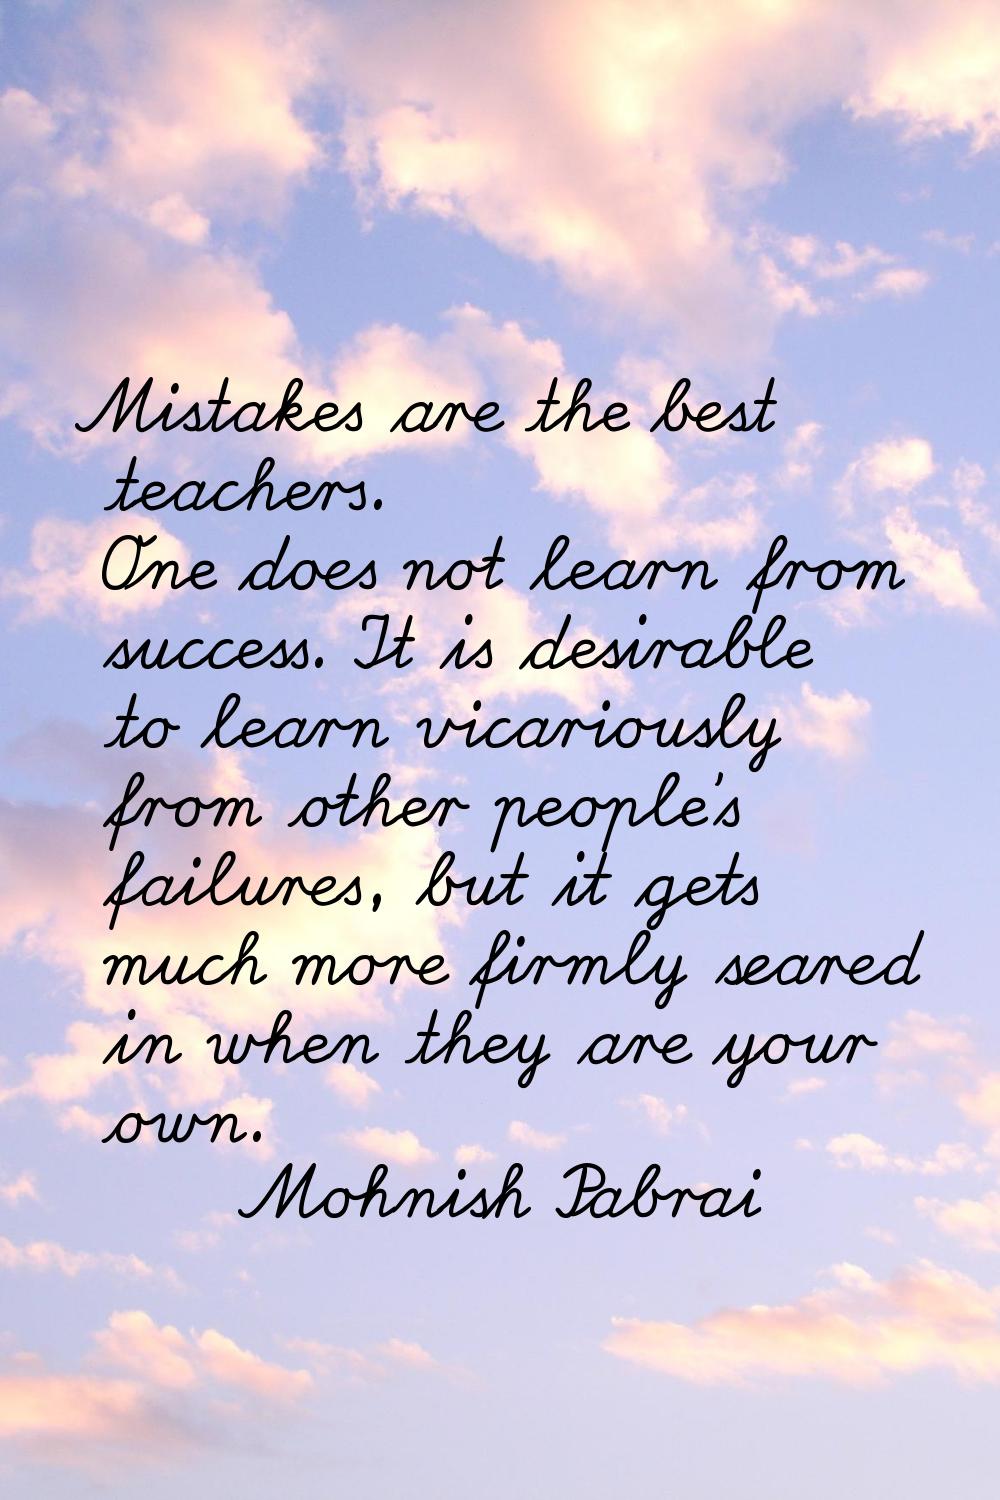 Mistakes are the best teachers. One does not learn from success. It is desirable to learn vicarious